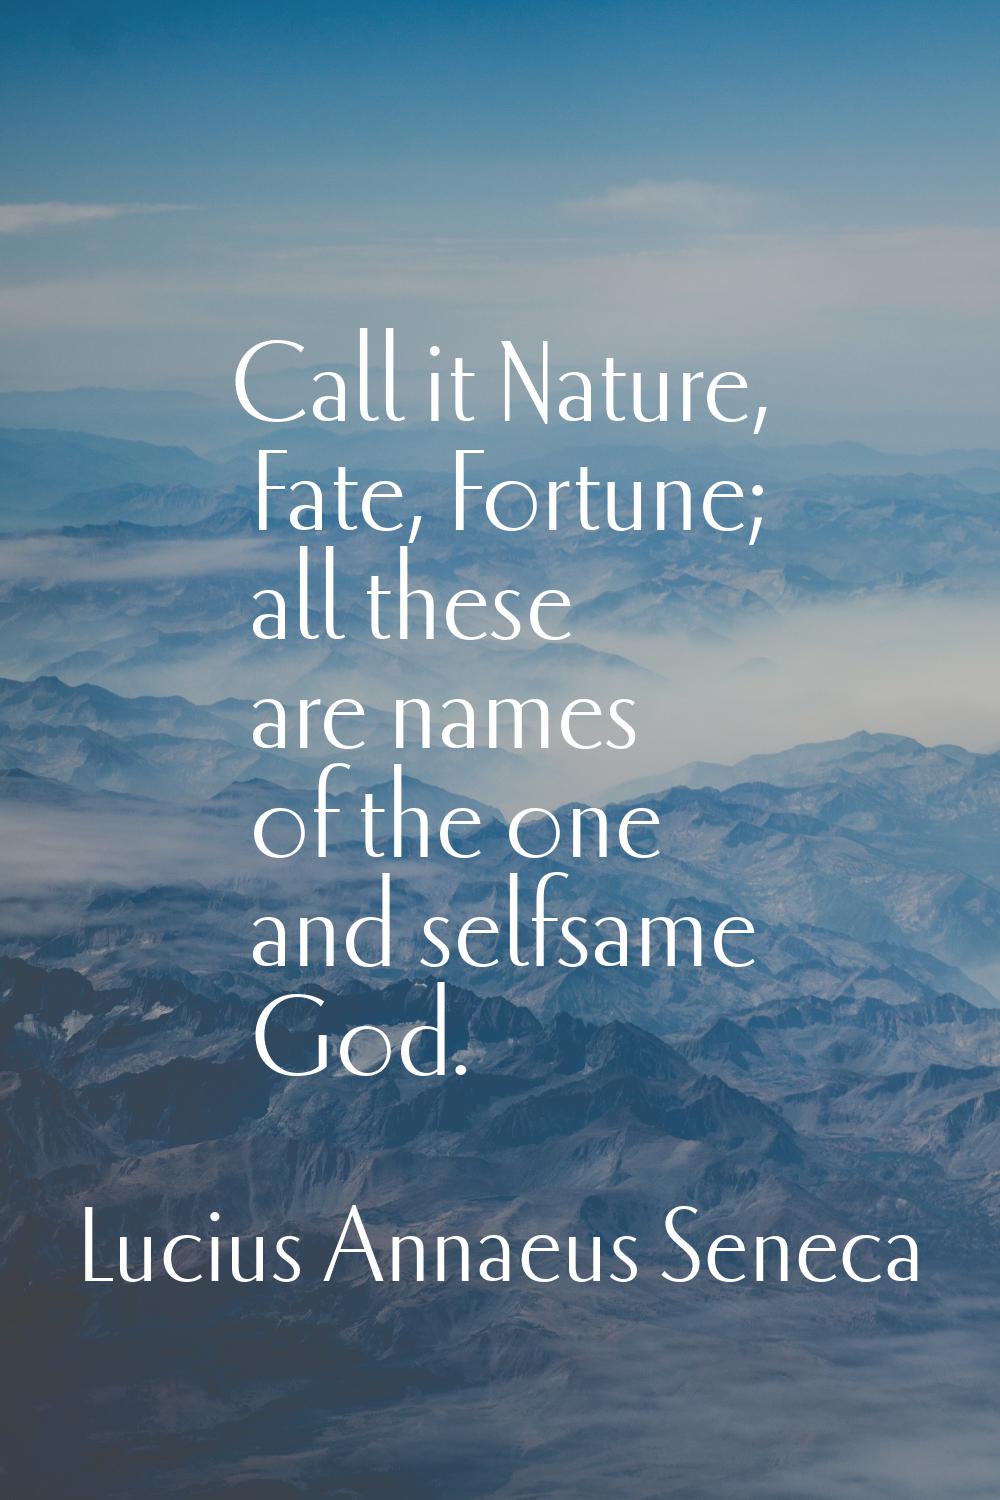 Call it Nature, Fate, Fortune; all these are names of the one and selfsame God.